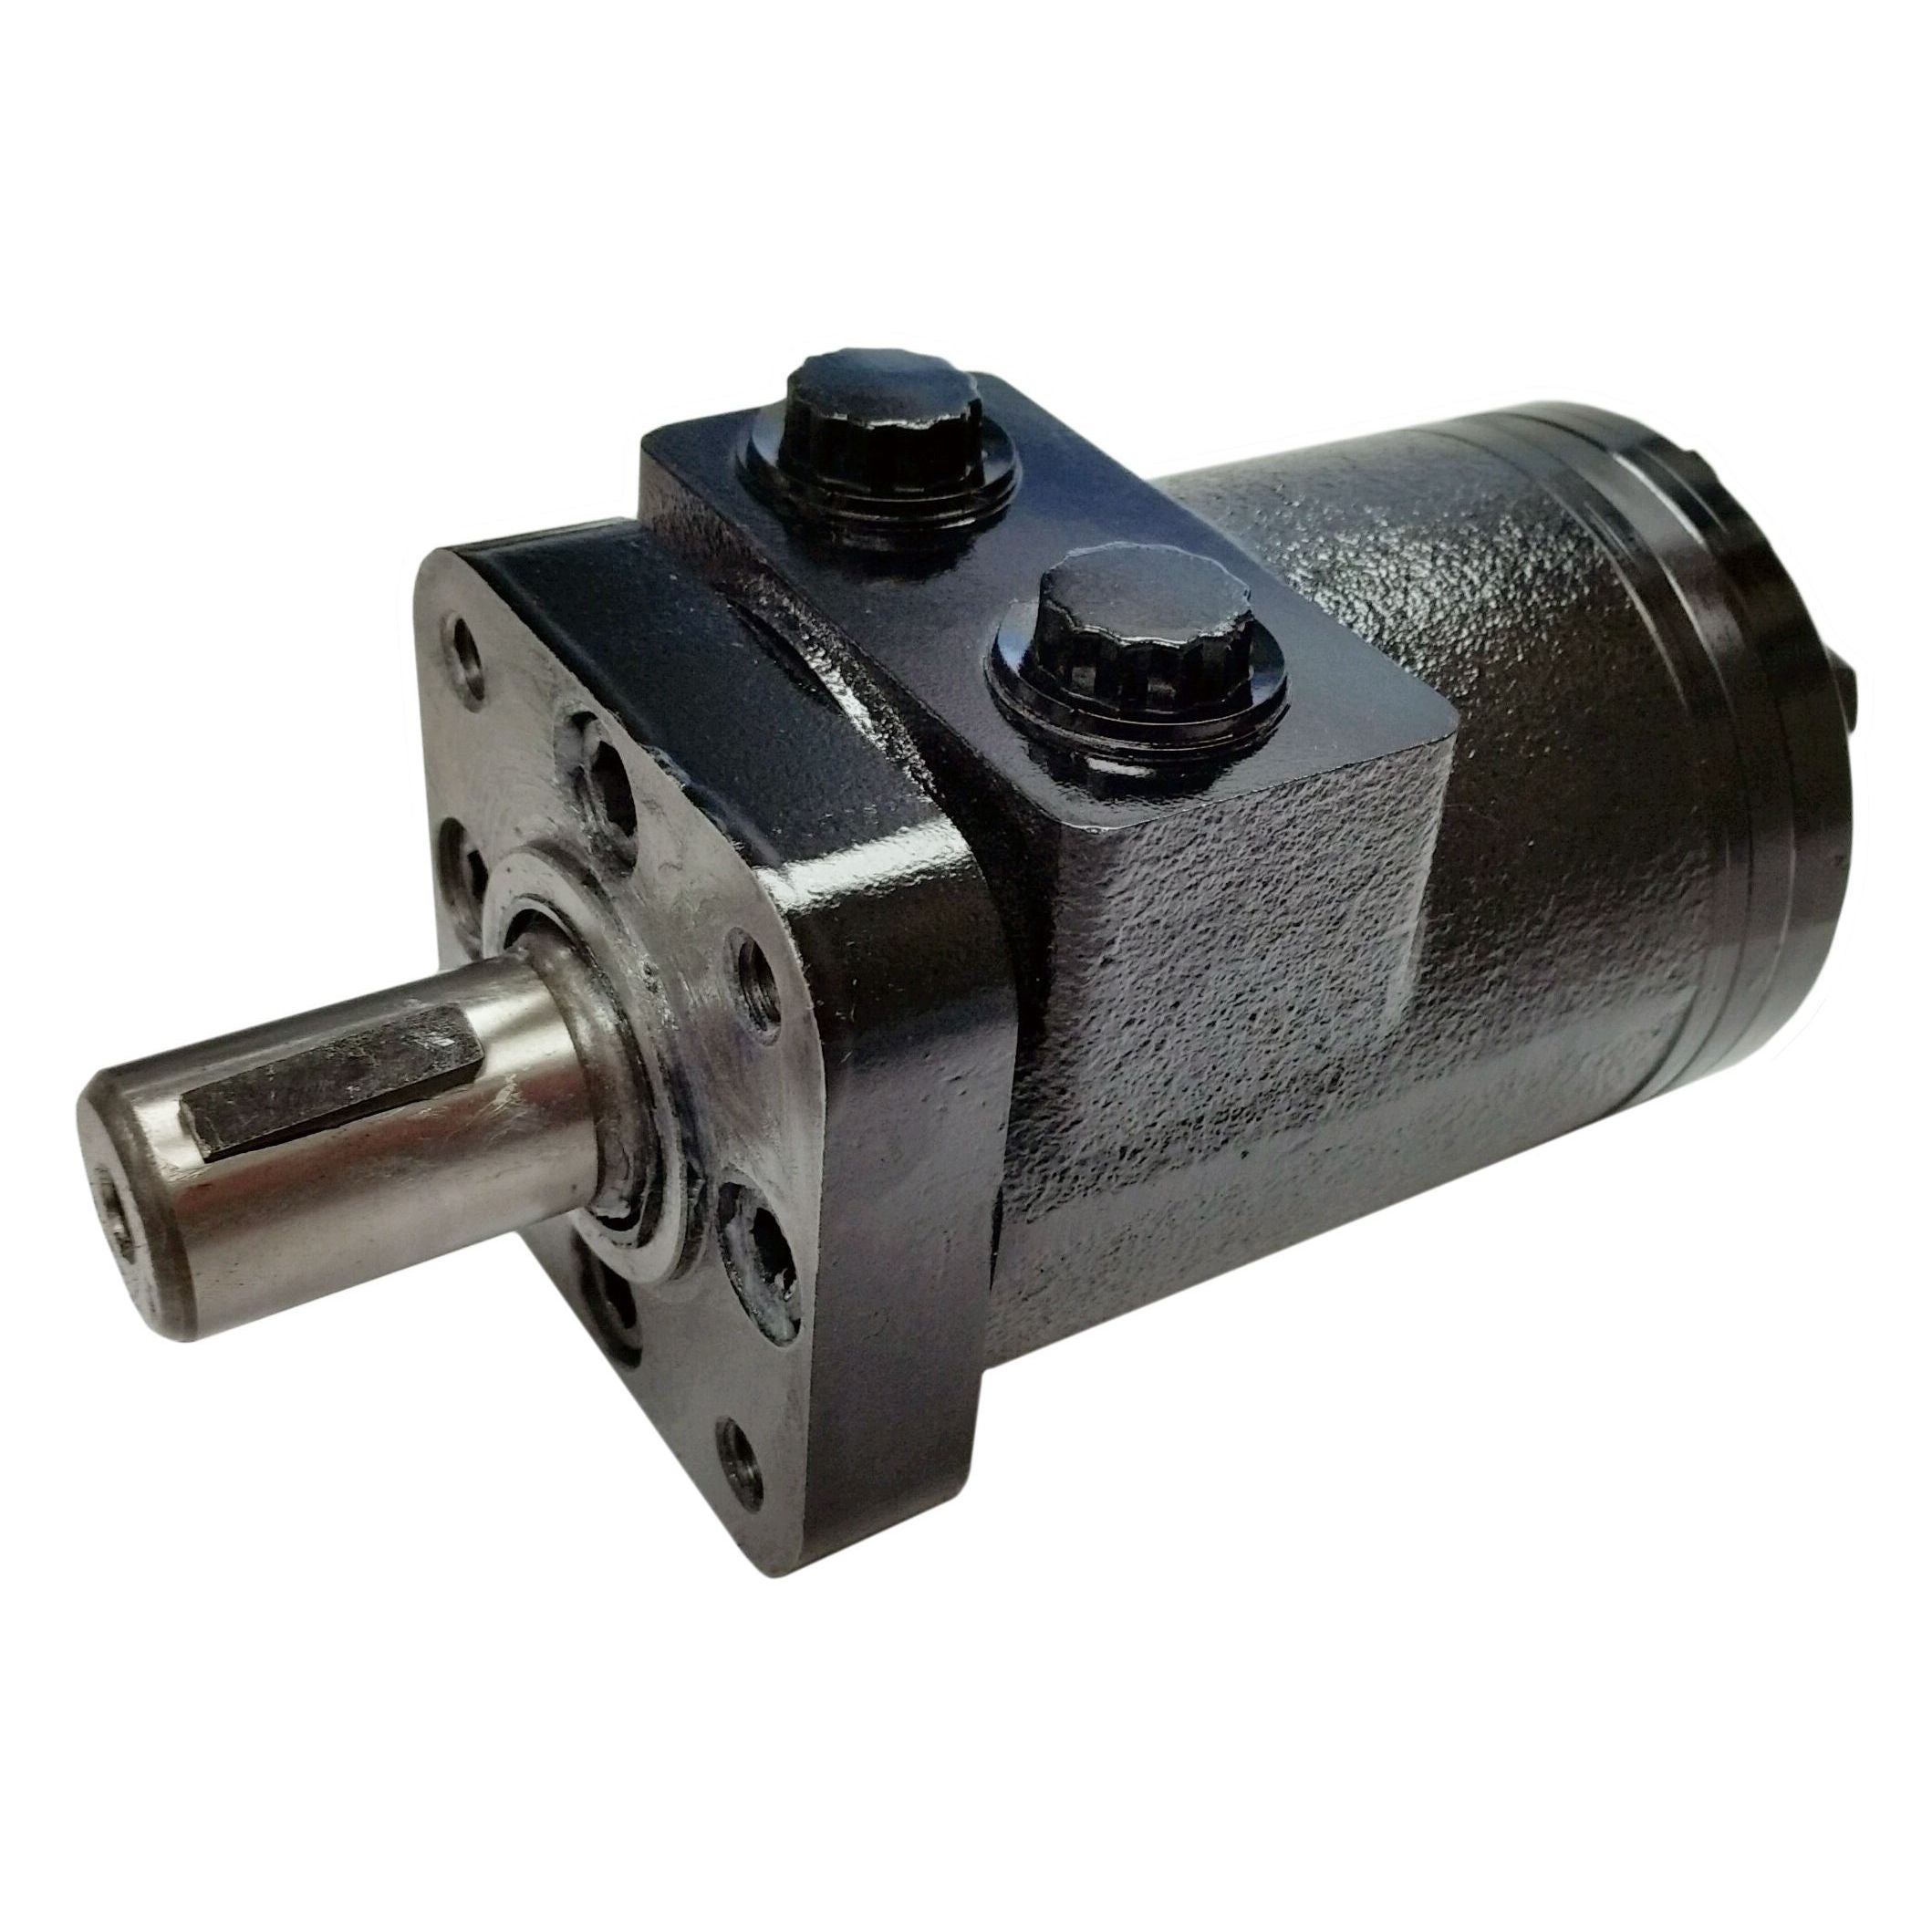 BMPH-80-H4-K-F : Dynamic LSHT Motor, 77.7cc, 770RPM, 1292in-lb, 2031psi Differential, 15.85GPM, SAE A 4-Bolt Mount, 1" Bore x 1/4" Key Shaft, Side Ported, Manifold